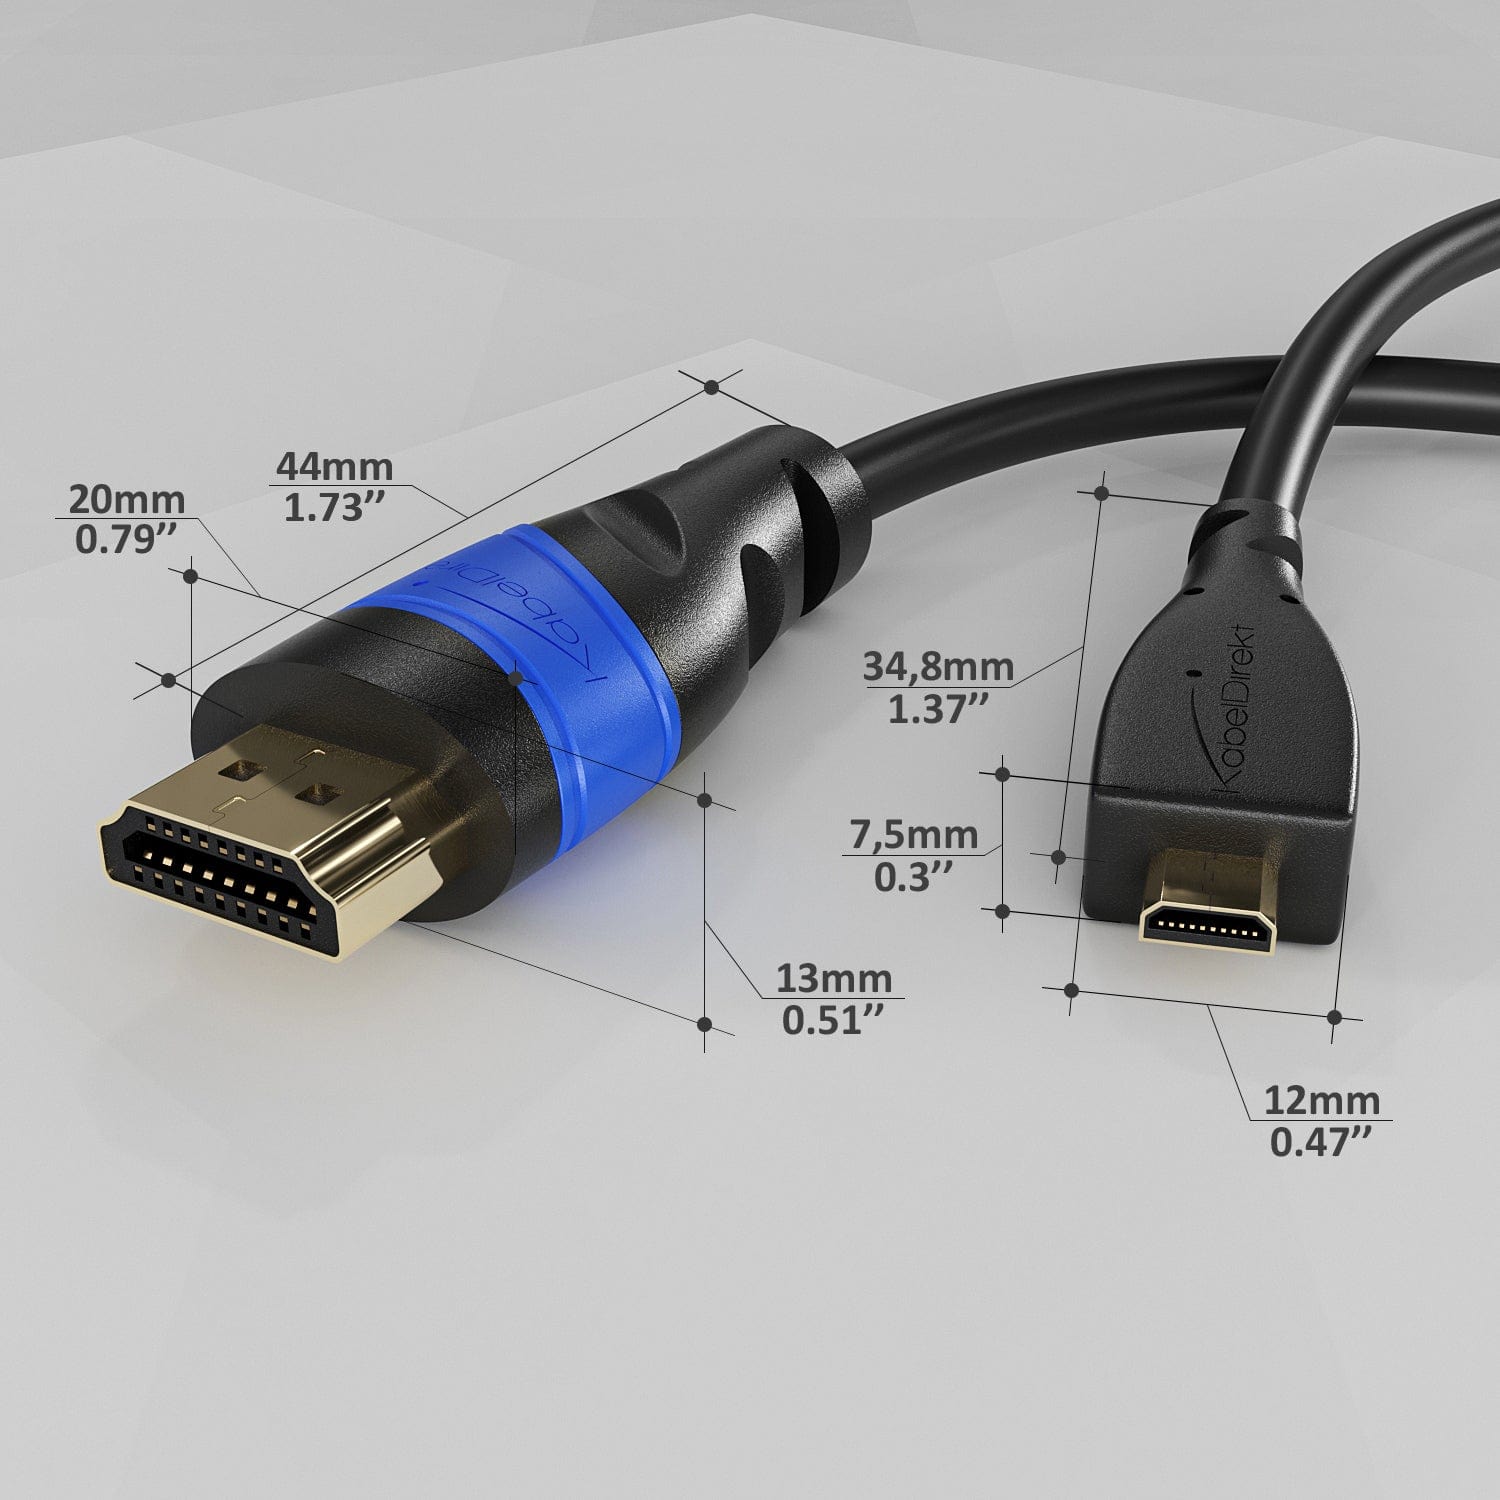  BRENDAZ 4K Mini HDMI to HDMI Cable – High Speed Ultra